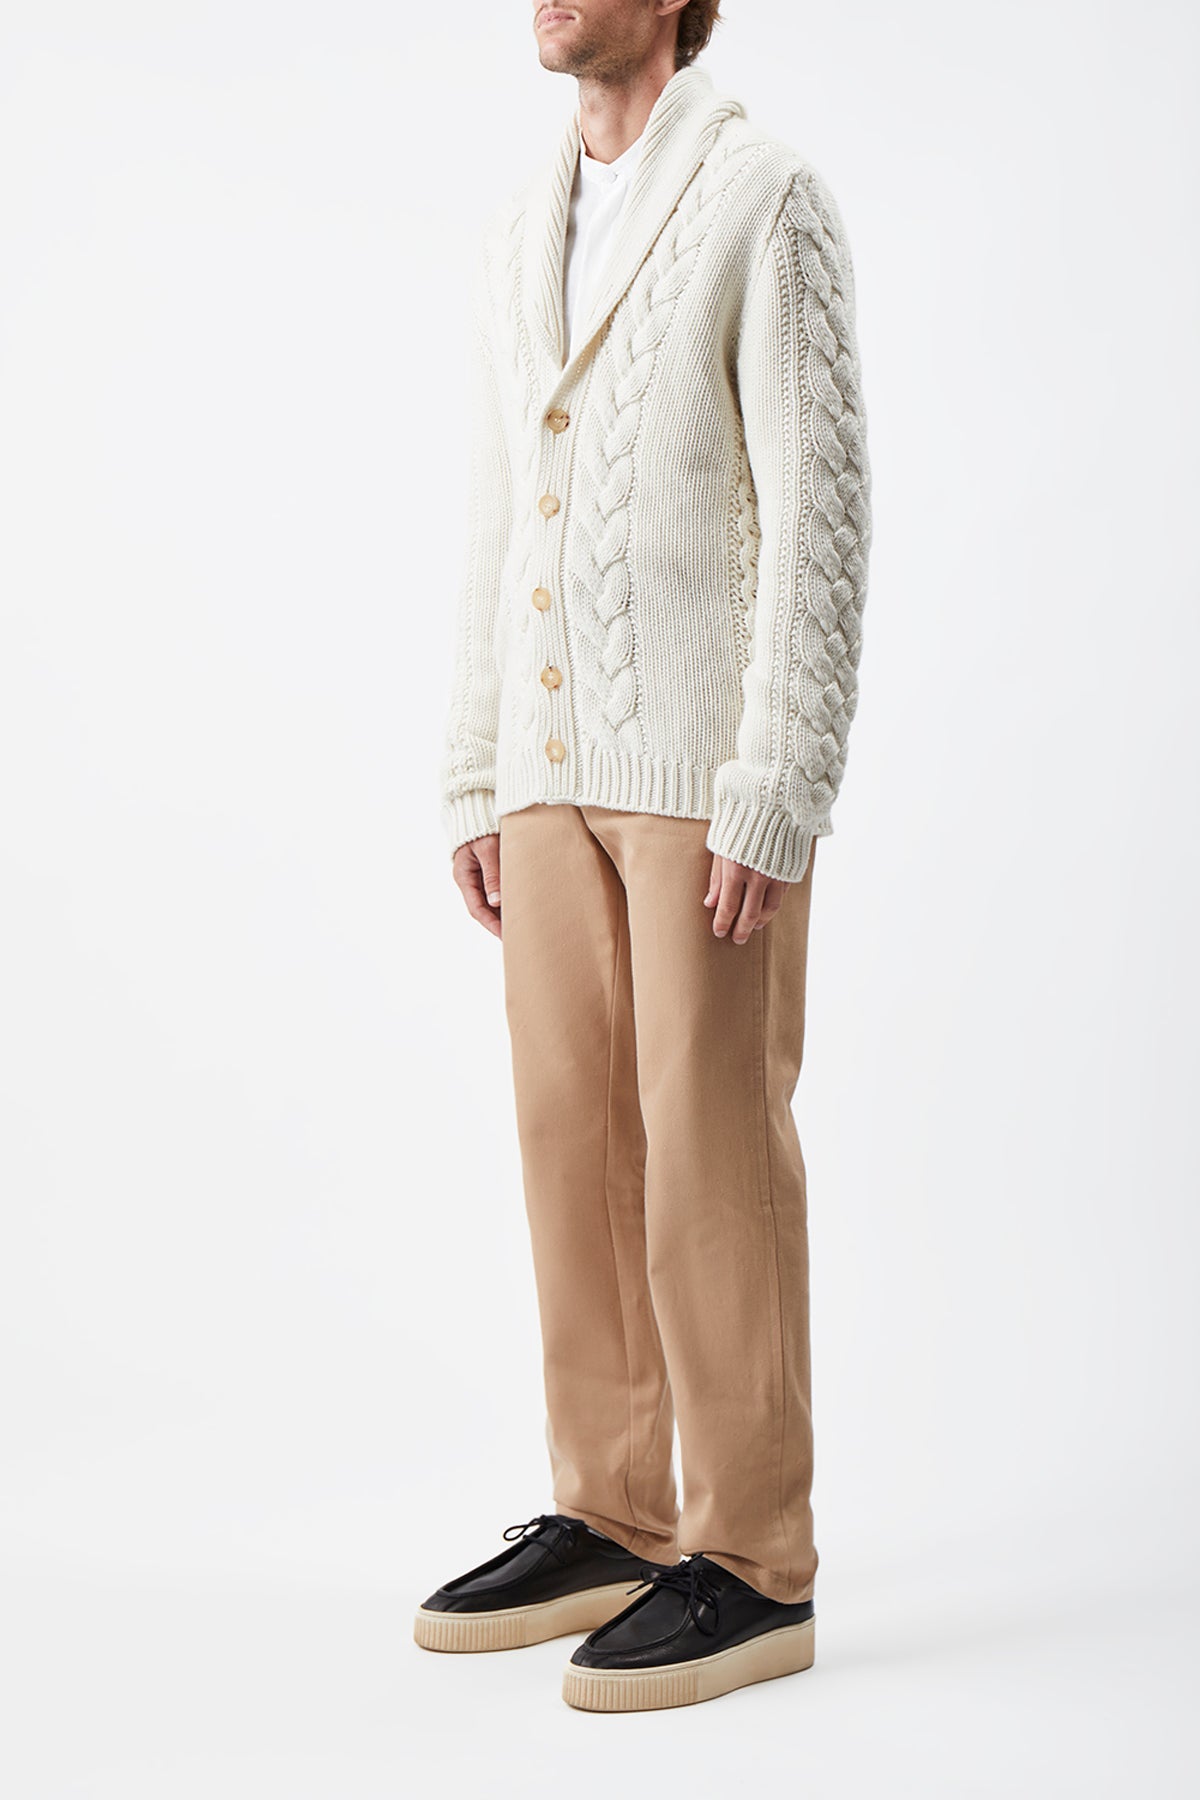 Casa Knit Cardigan in Ivory Cashmere